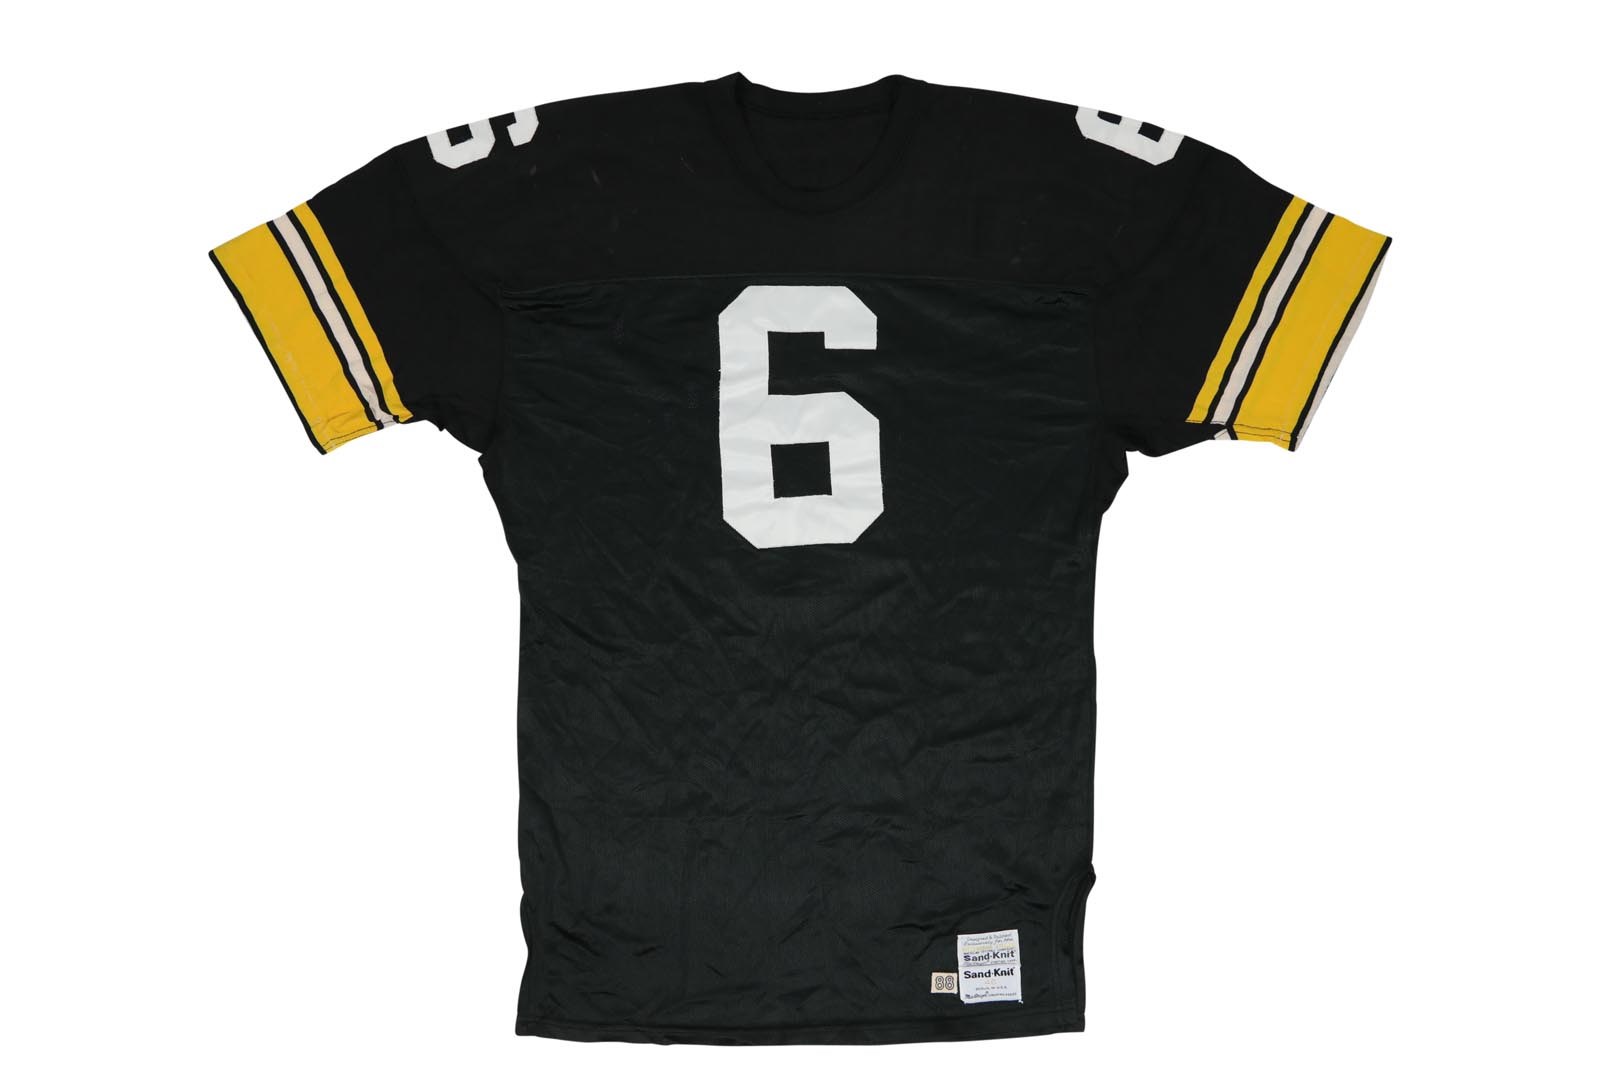 bubby brister steelers jersey